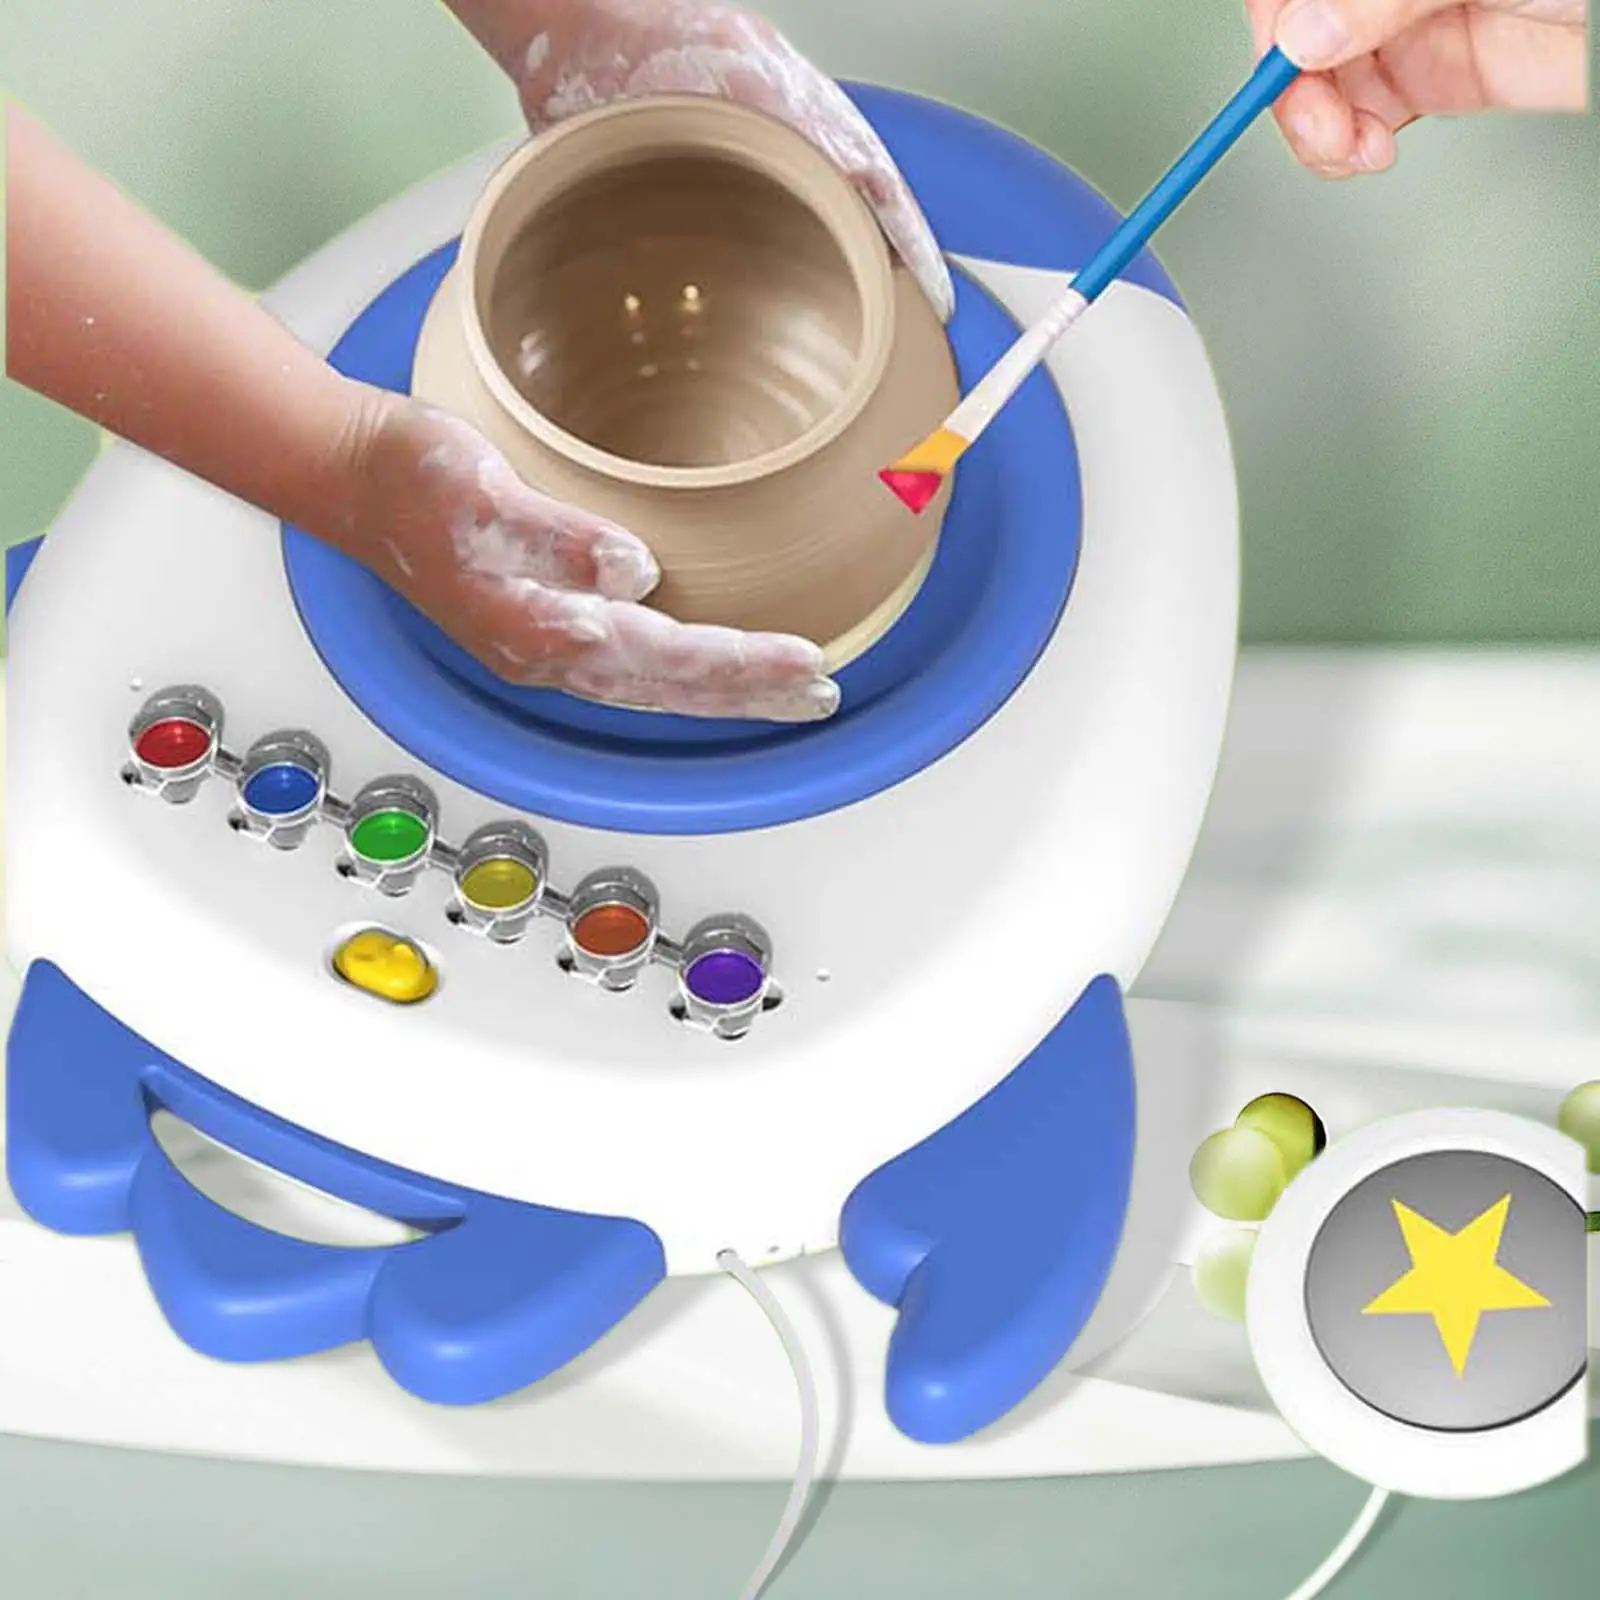 Handmade Pottery Machine Teaching Aids Cognition Interactive Toys for Learning Activities Preschool Kindergarten Holiday Daycare